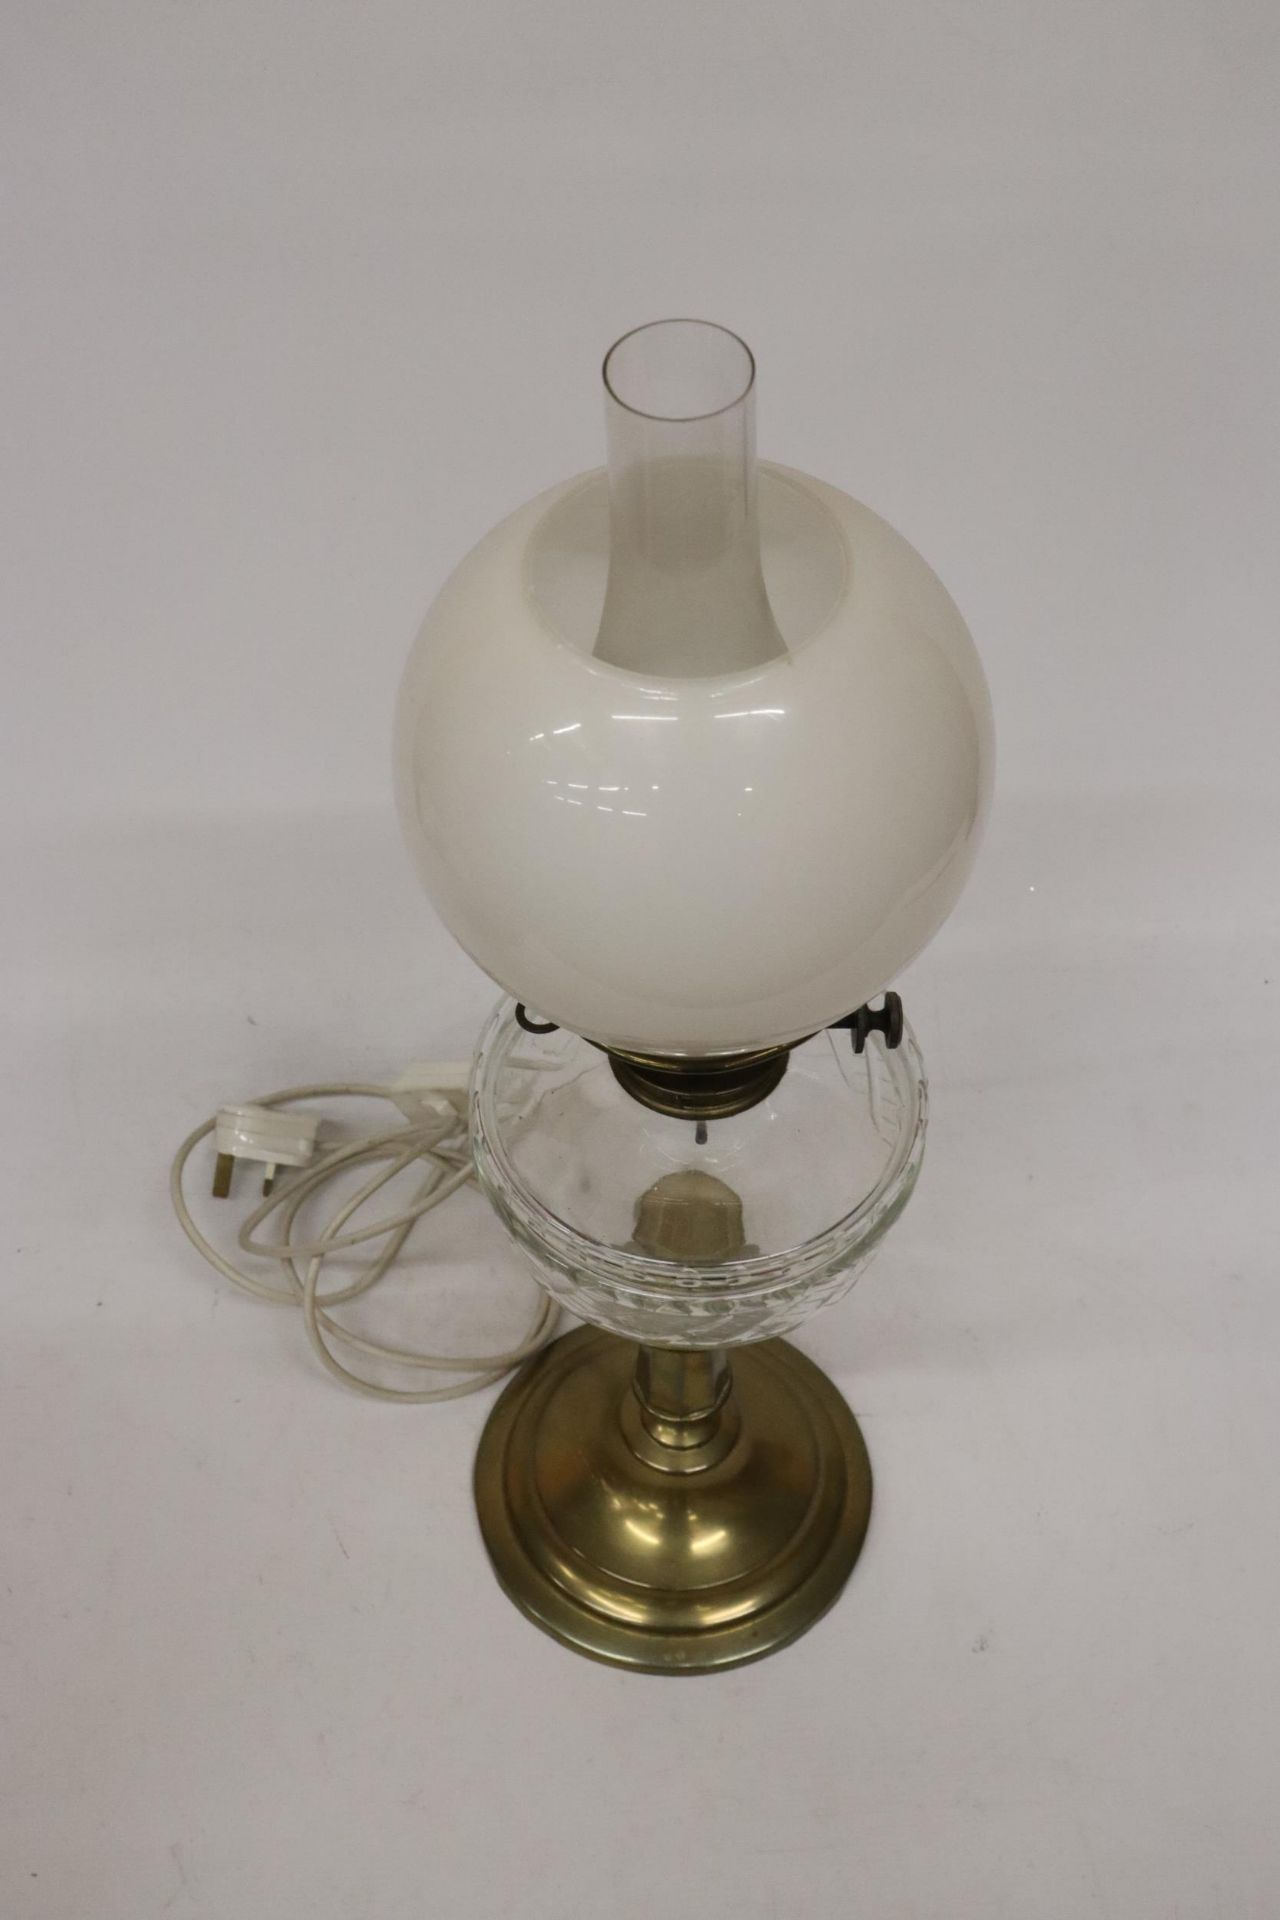 A 19TH CENTURY OIL LAMP CONVERTED TO ELECTRIC WITH A BRASS BASE, CLEAR CUT GLASS RESERVOIR, MILK - Image 5 of 8